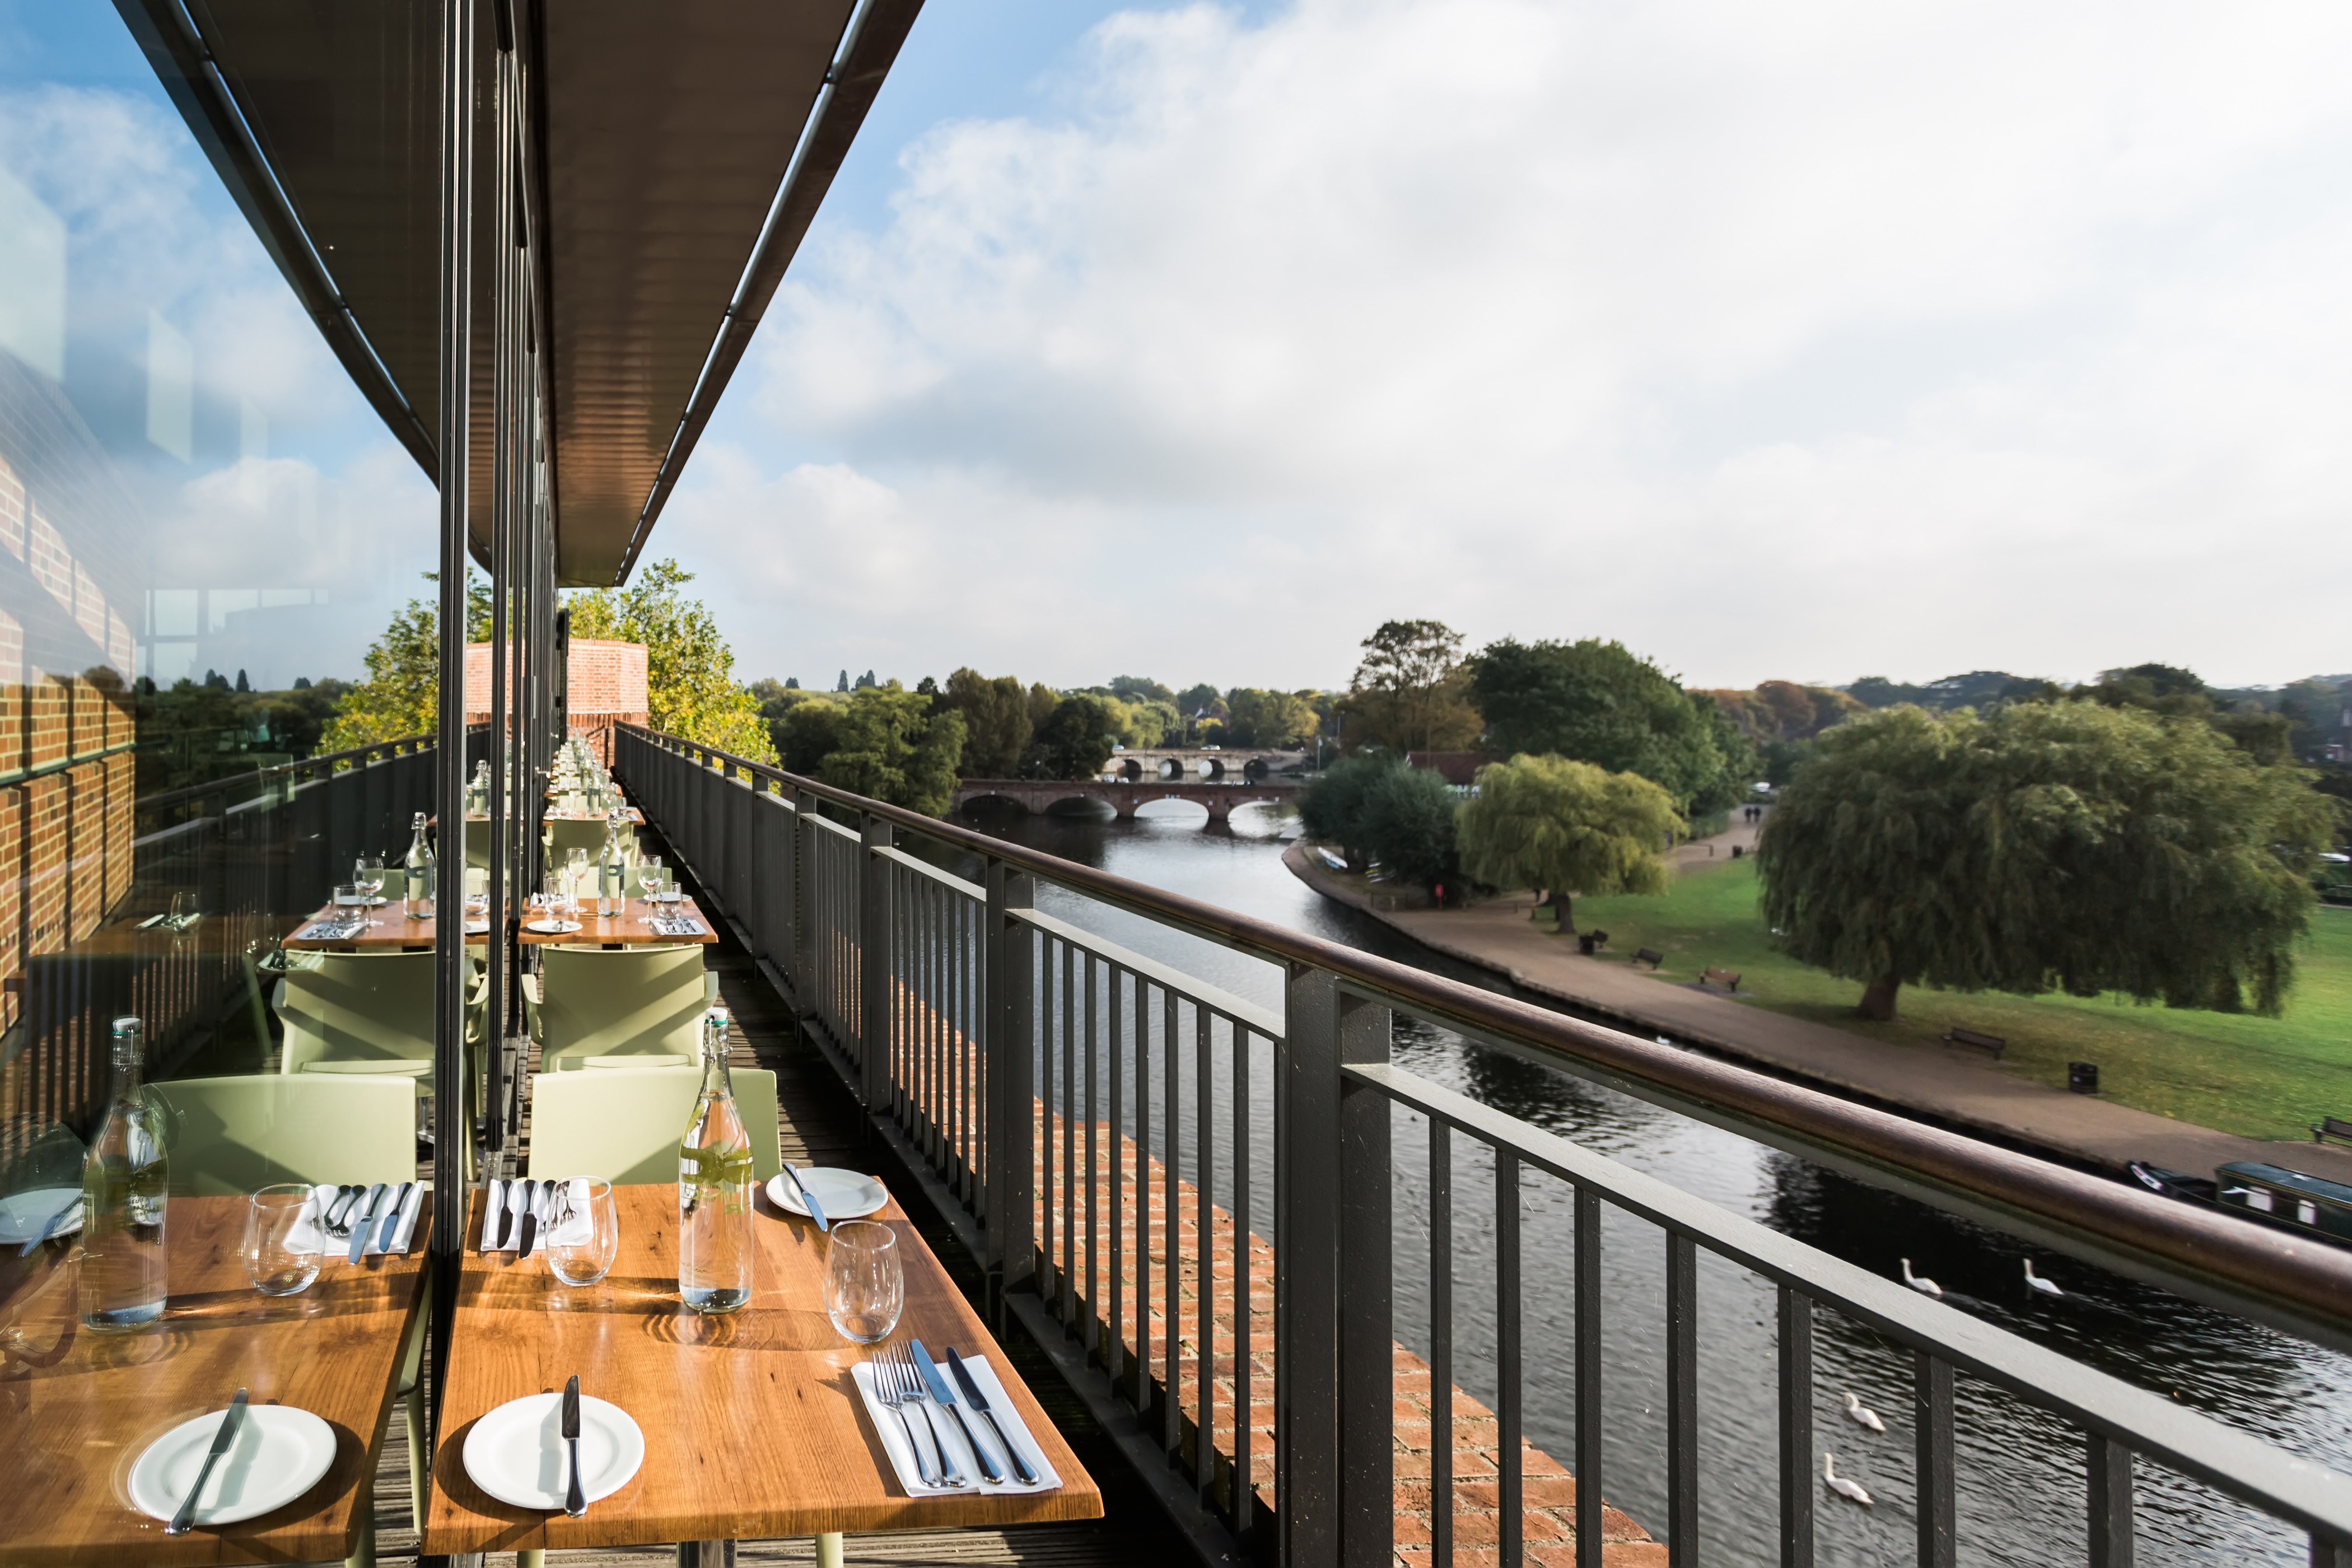 Outside Dining At The Rsc Rooftop Restaurant 2015 Photo By Sara Beaumont C  Rsc 176332